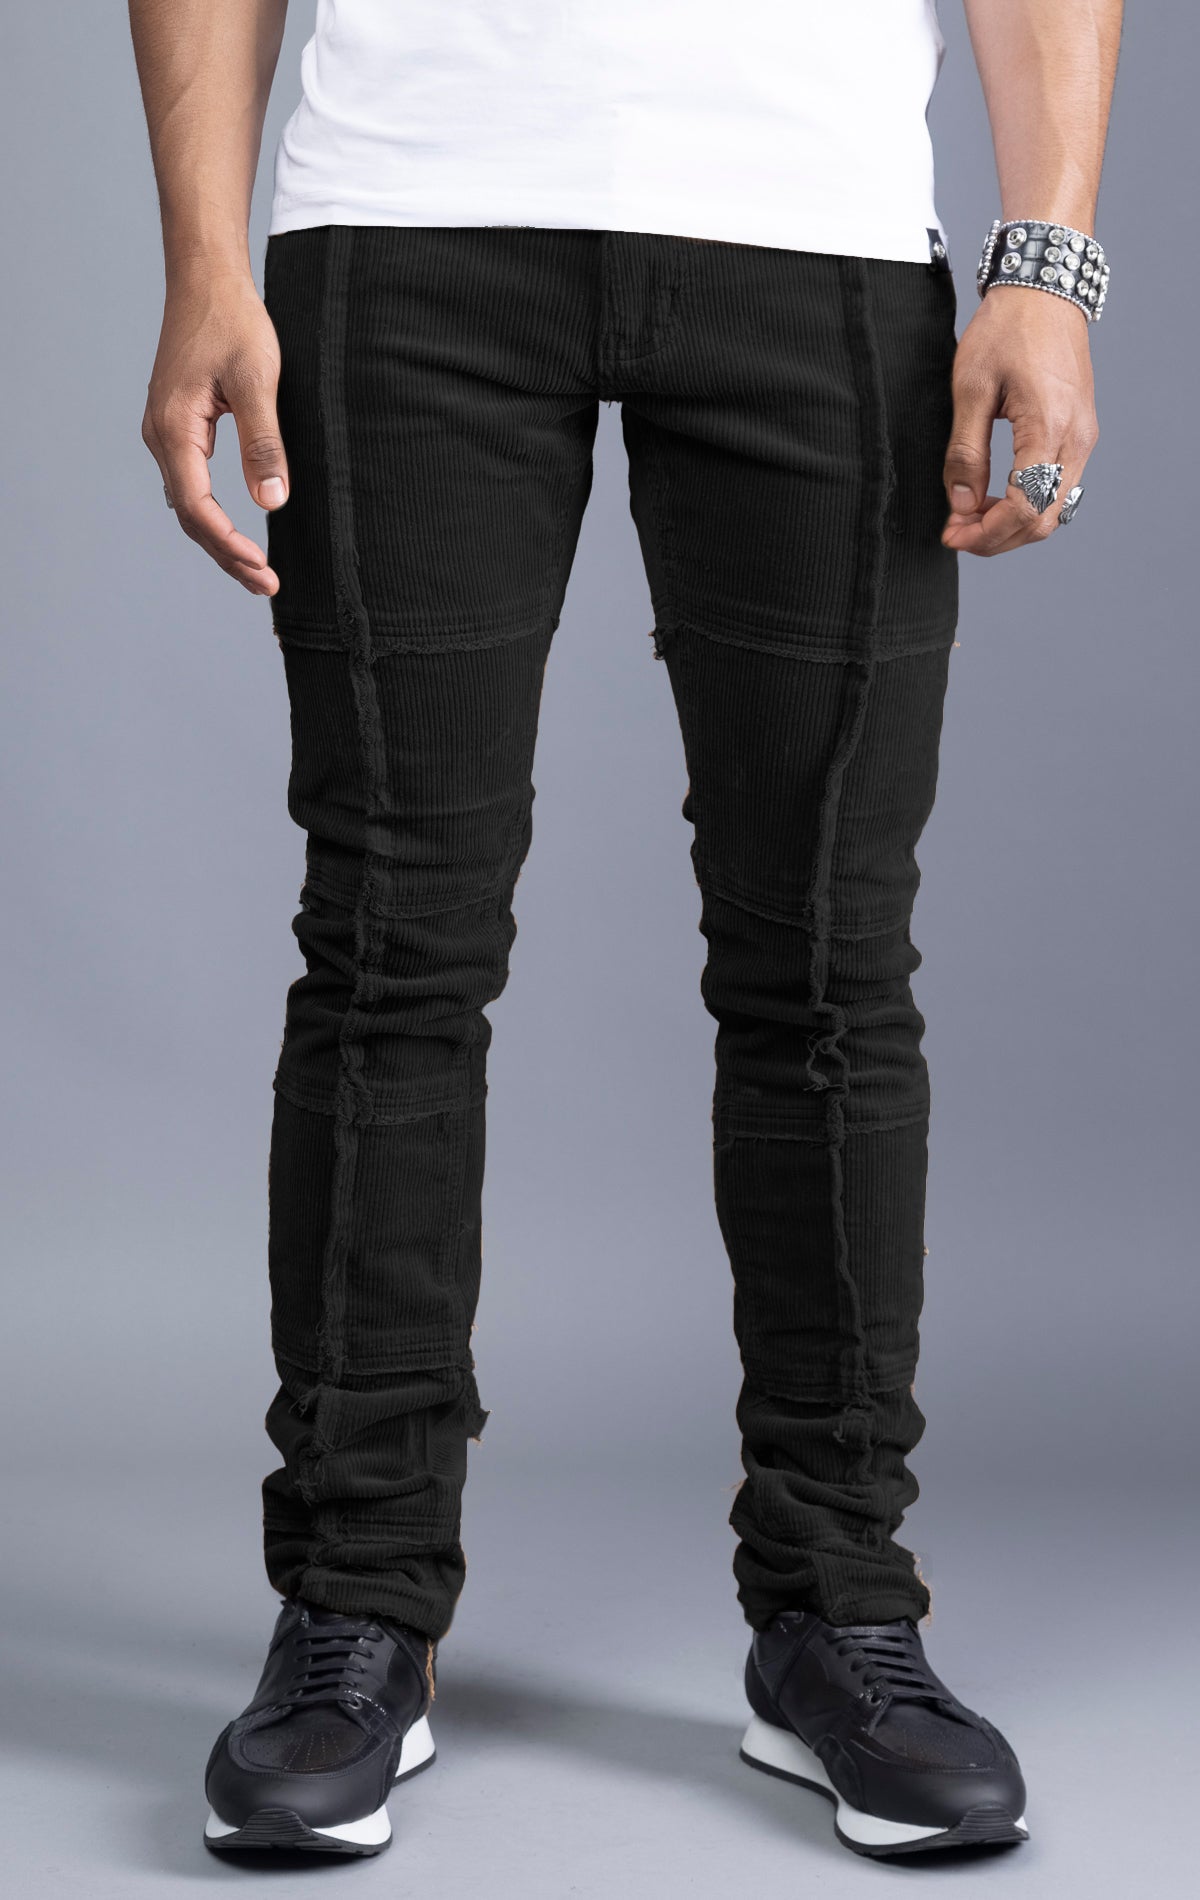 Men's black corduroy pants with stacked legs, cut-and-sew details, and raw hems.